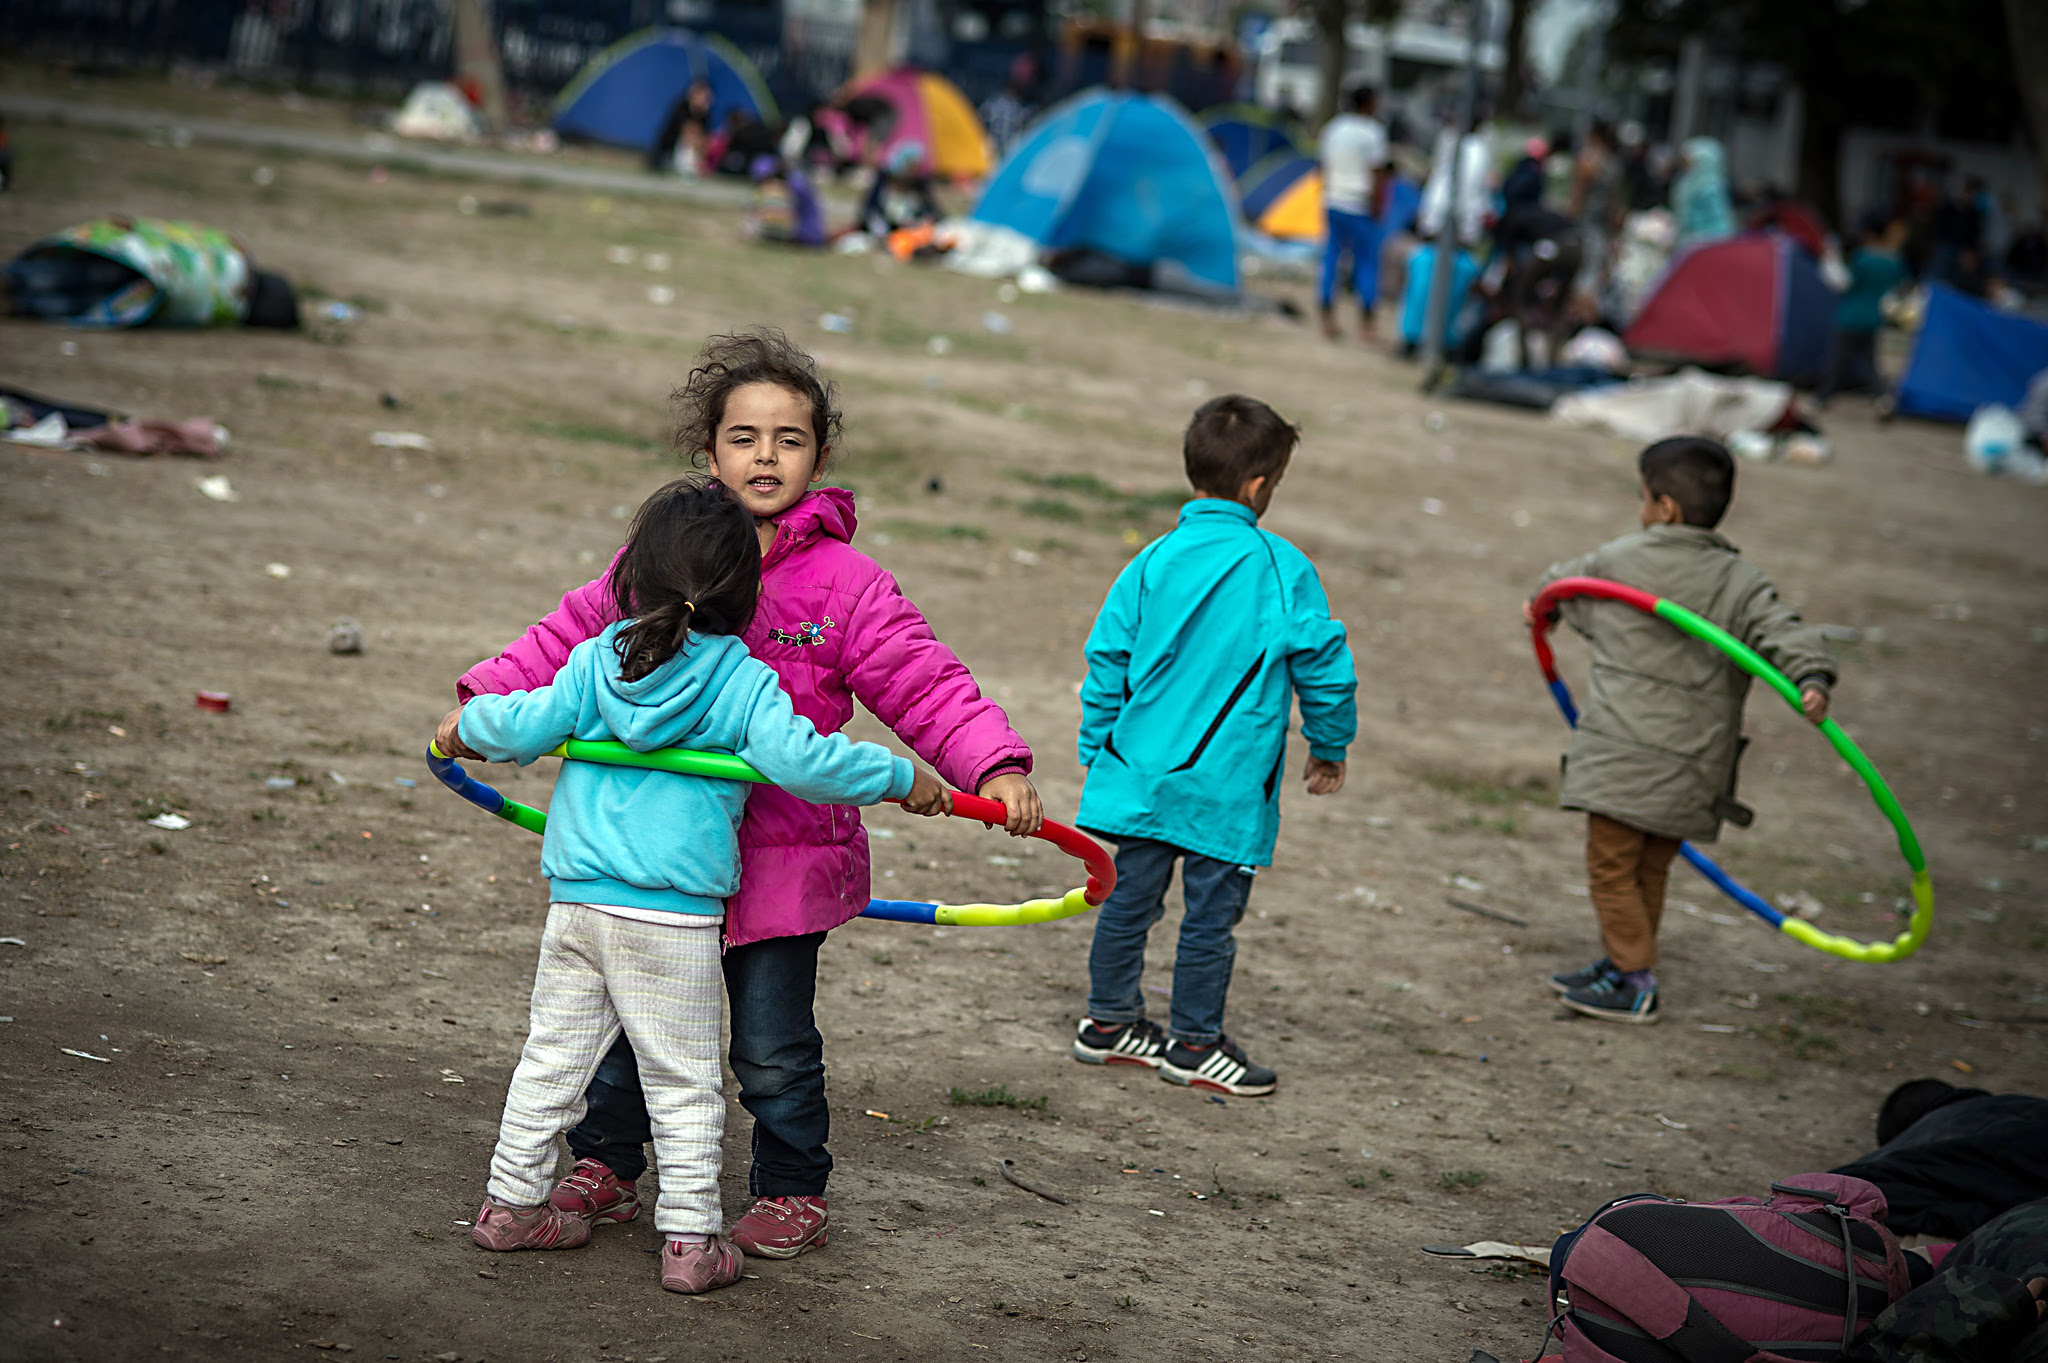 Children play with hula hoops at a park ...Children play with hula hoops at a park where migrants have found temporary shelter in the Serbian capital Belgrade on August 25, 2015. A record number of refugees streamed into EU member state Hungary from Serbia on August 24, police said, just days before Hungary completes a border fence to keep out migrants. A total of 2,093 migrants, the highest ever daily total, crossed the border near the Hungarian town of Roszke, a police statement said. They were part of a wave of around 7,000 refugees whose journey to the European Union had been blocked last week when Macedonia declared a state of emergency and closed its borders after being overwhelmed by the huge influx of people, amid Europe's worst migration crisis since World War II.   AFP PHOTO / ANDREJ ISAKOVICANDREJ ISAKOVIC/AFP/Getty Images